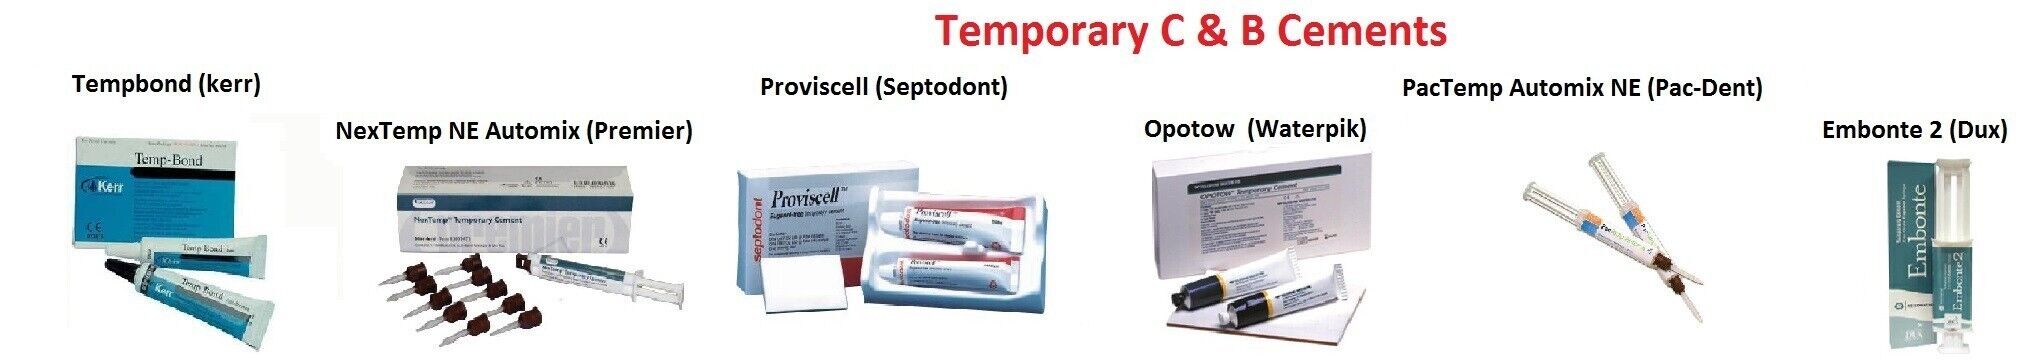 Temporary C & B Cements